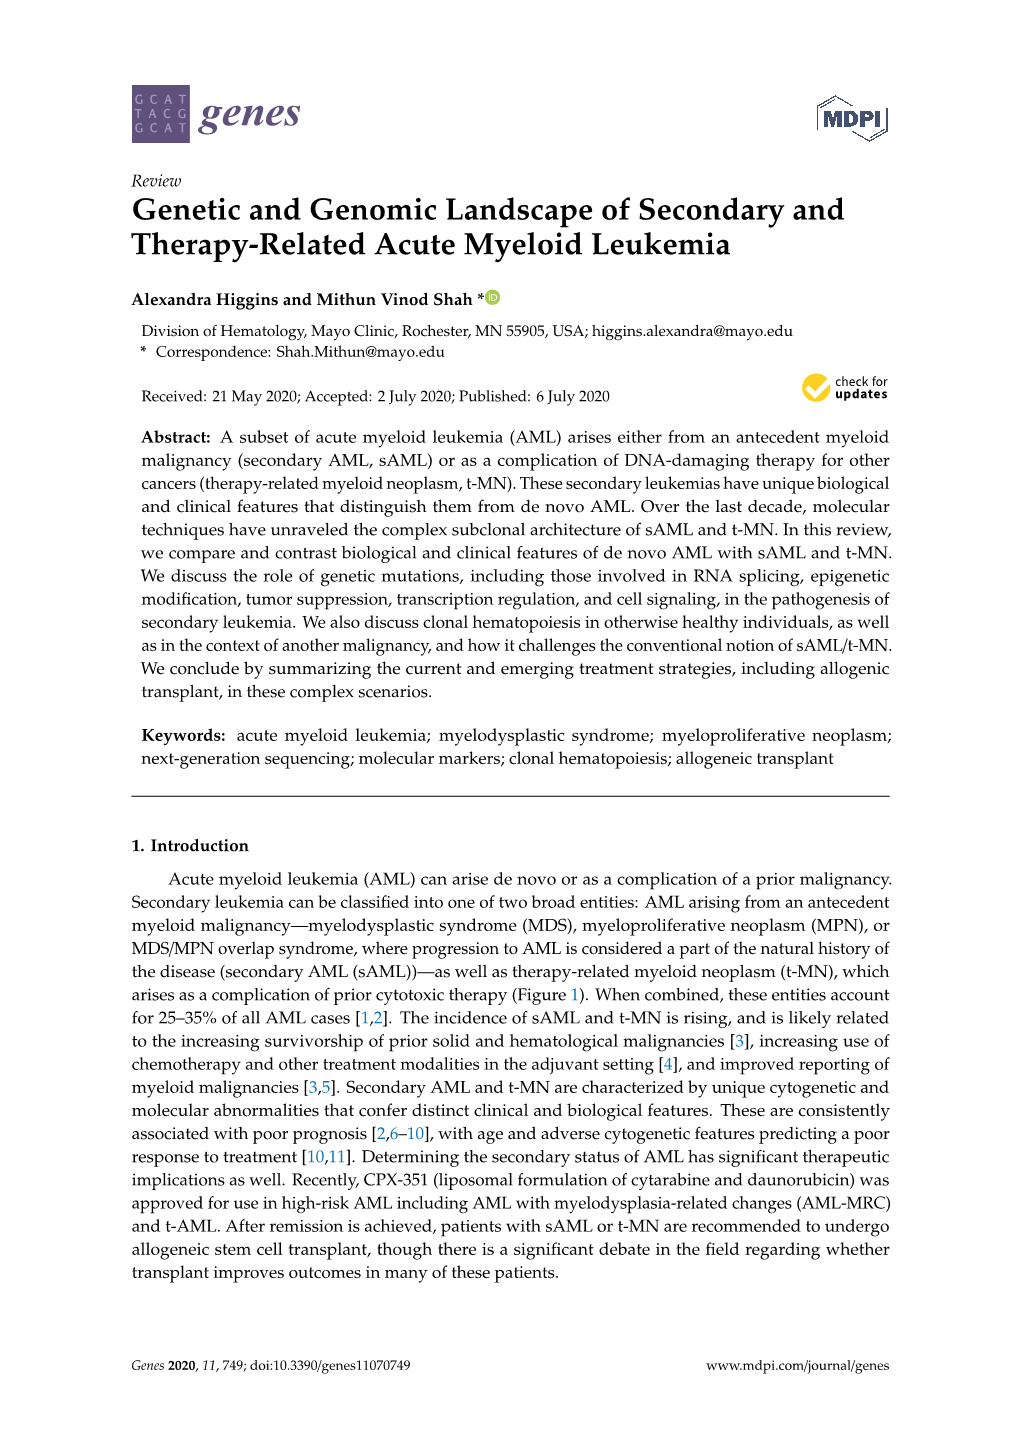 Genetic and Genomic Landscape of Secondary and Therapy-Related Acute Myeloid Leukemia